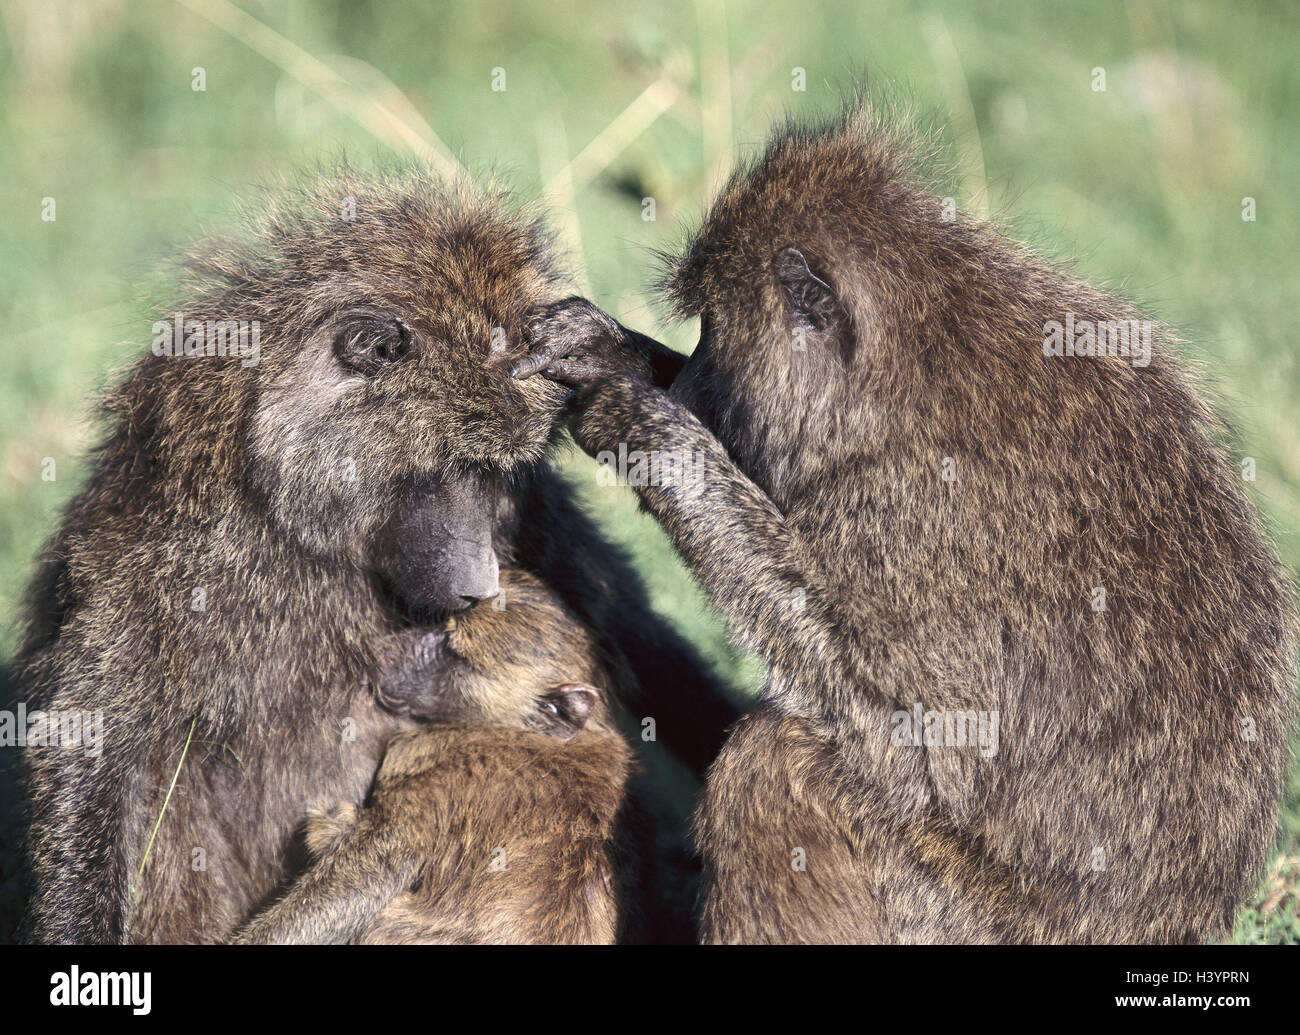 Anubispaviane, Papio anubis, fur care, Africa, mammals, wild animals, primates, Old world monkeys, Catarrhini, dog monkeys, Cercopithecoidea, steppe baboons, green baboons, females, two, young animal, young, lausen, social behaviour, outside Stock Photo